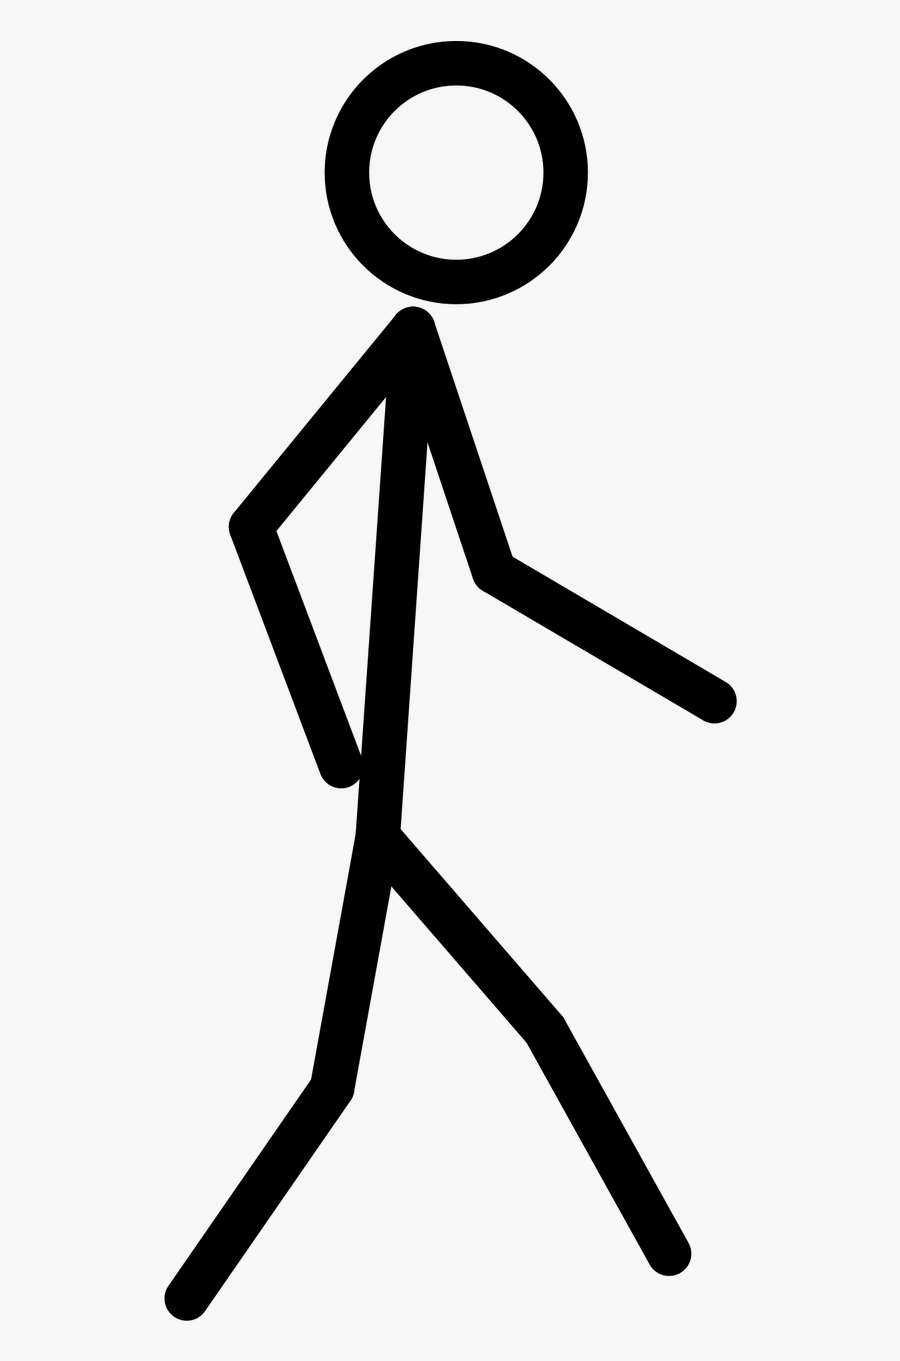 Doll Figure Sports Exercise Free Photo - Walking Stick Figure Clipart, Transparent Clipart